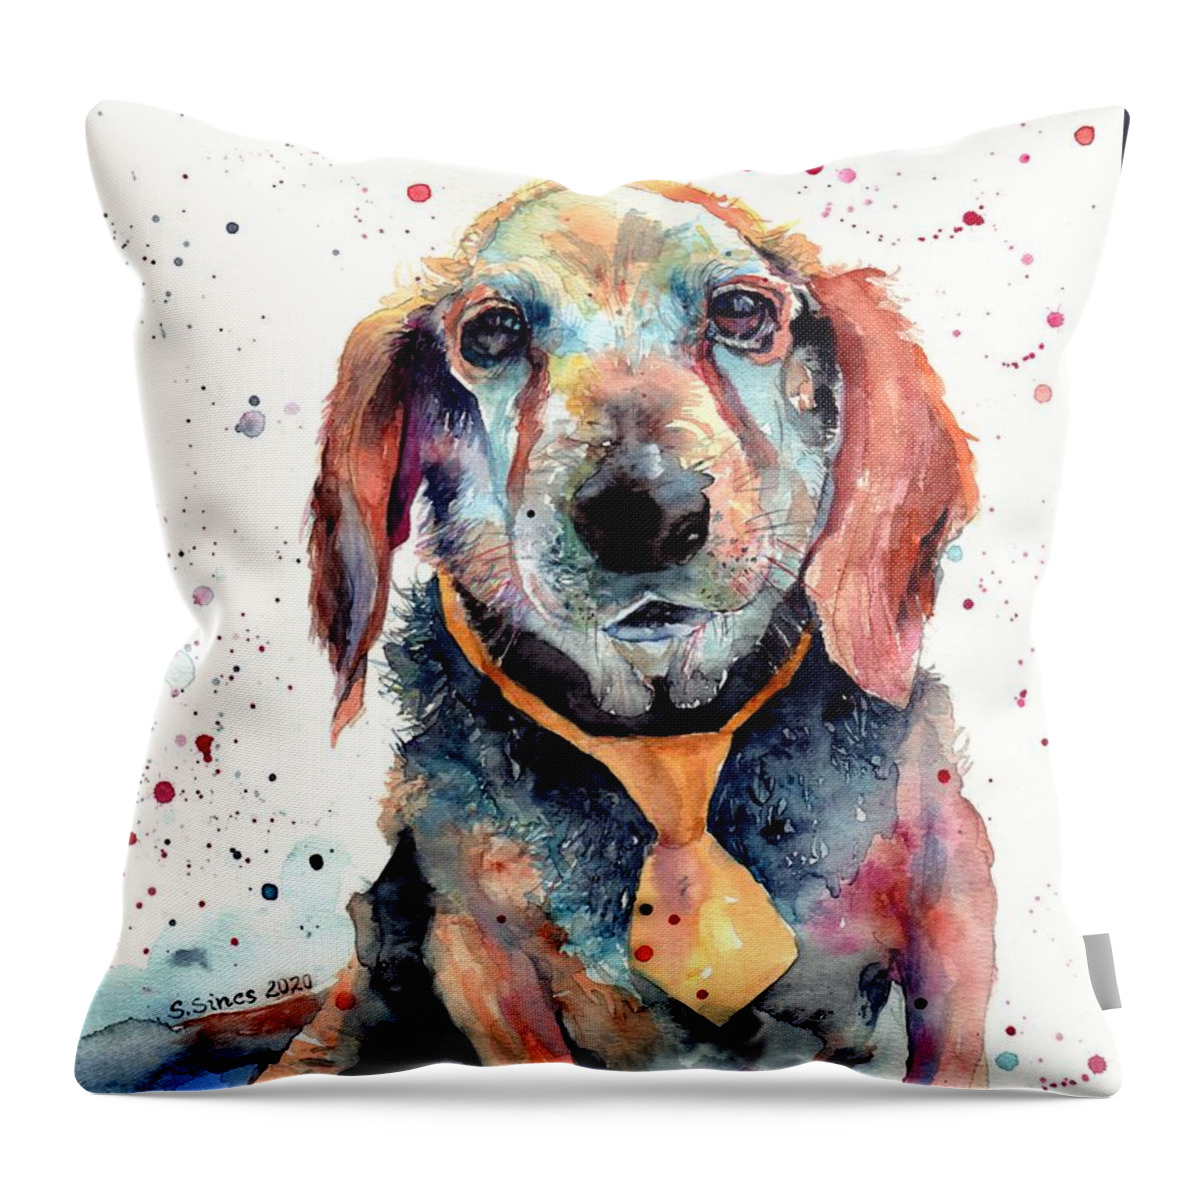 Beagle Throw Pillow featuring the painting Beagle Portrait by Suzann Sines